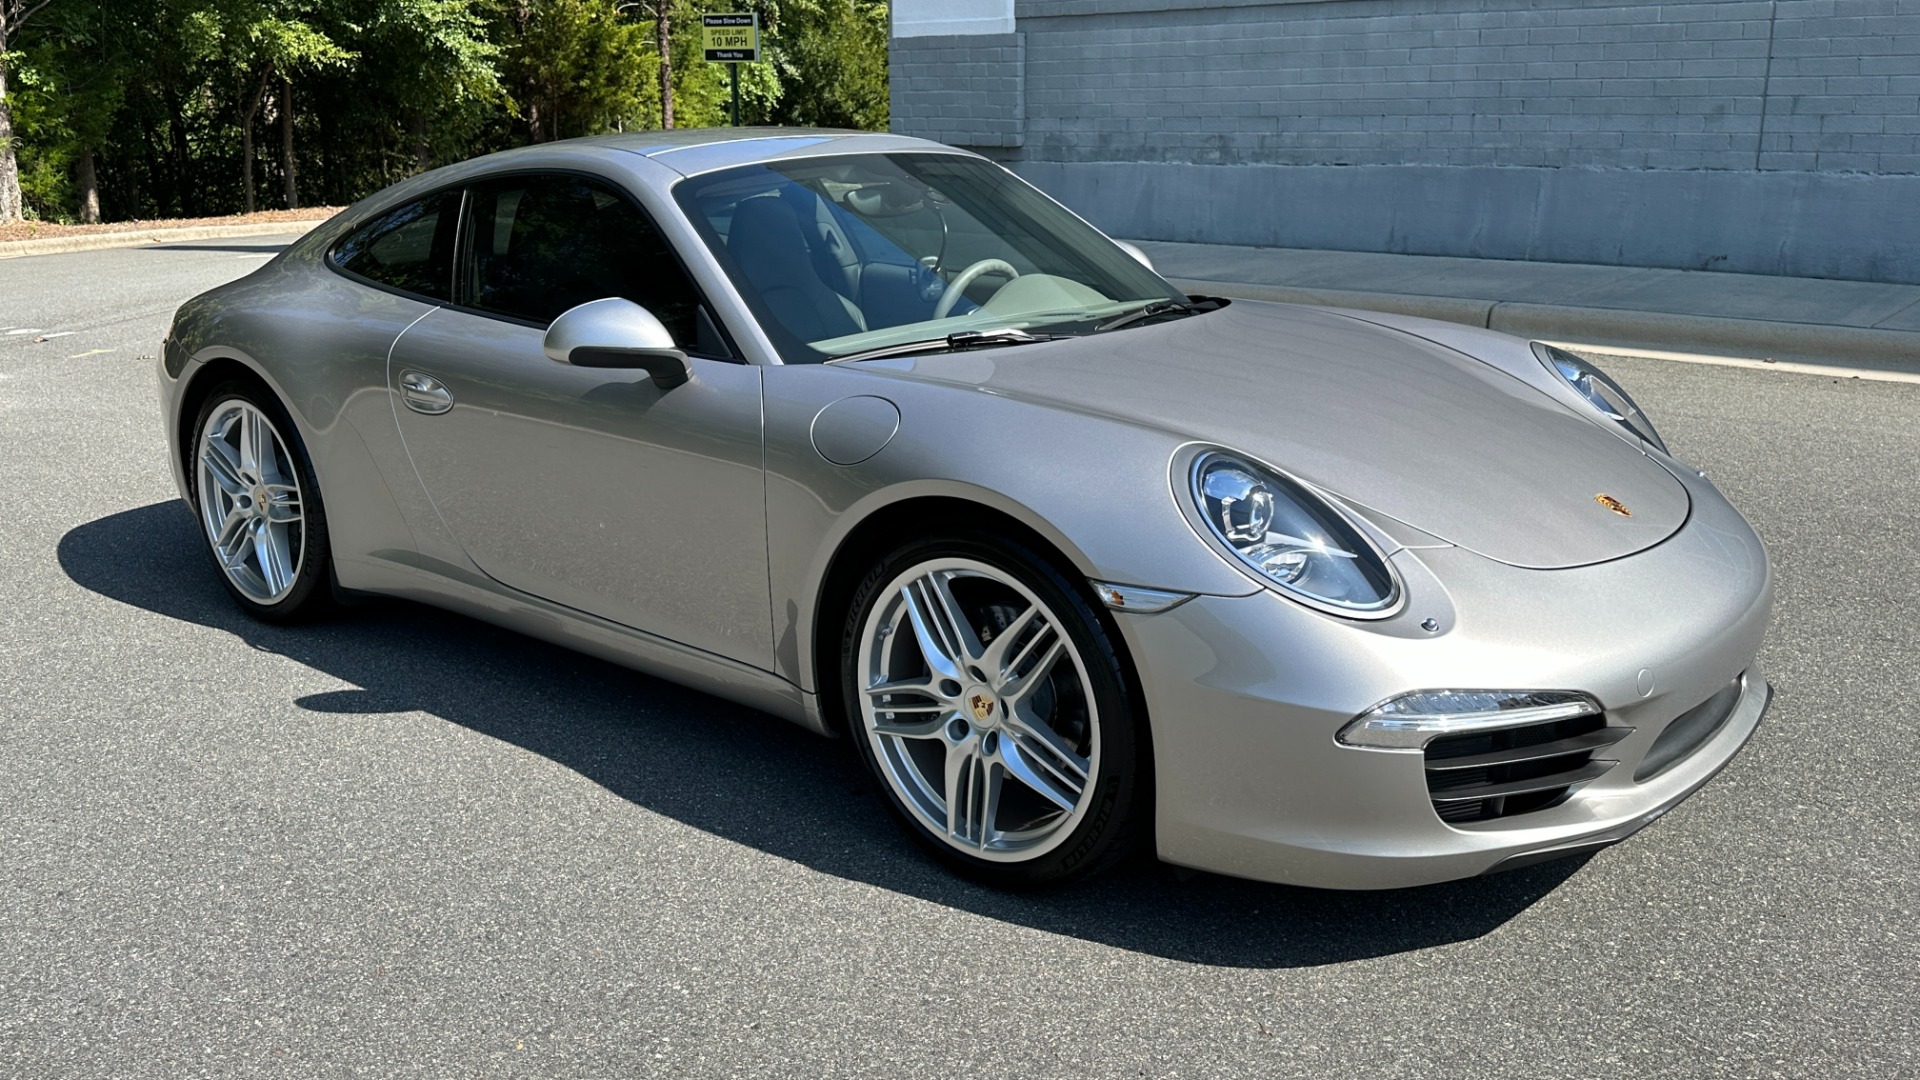 Used 2012 Porsche 911 991 CARRERA / PREMIUM PKG PLUS / SPORT EXHAUST / SPORT SEATS for sale Sold at Formula Imports in Charlotte NC 28227 2